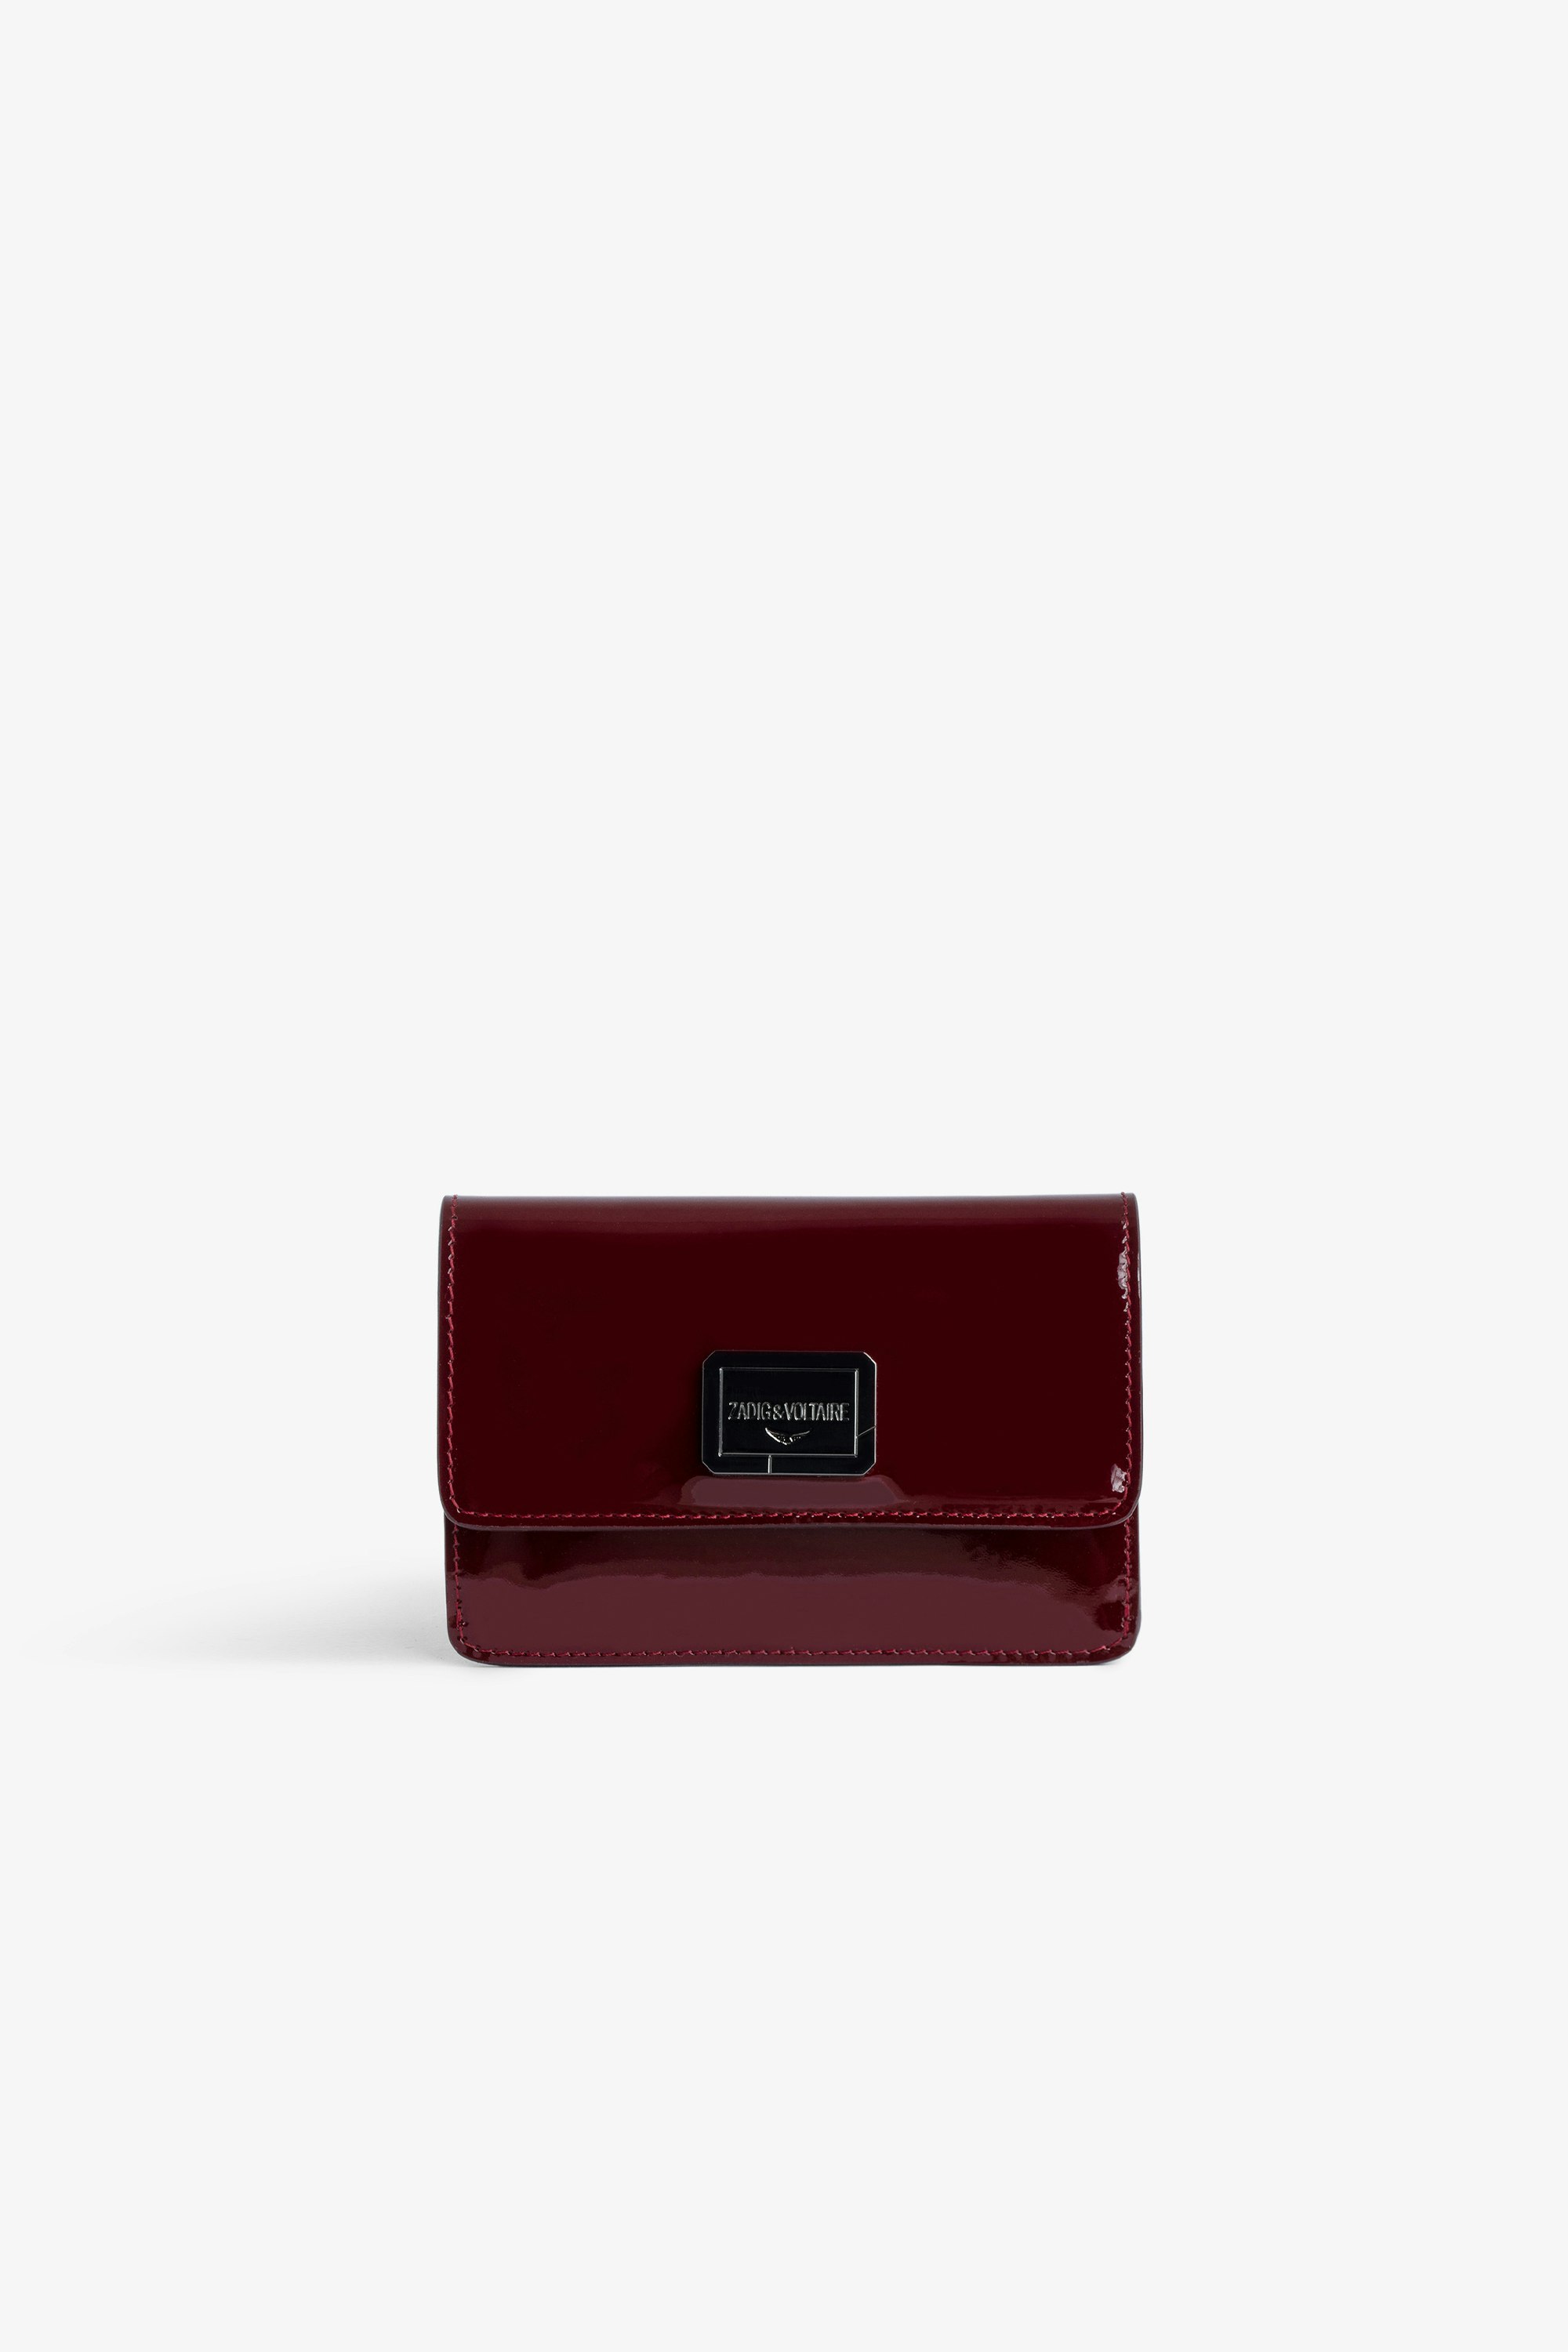 Le Cecilia 財布 Women's burgundy patent leather wallet with flap 